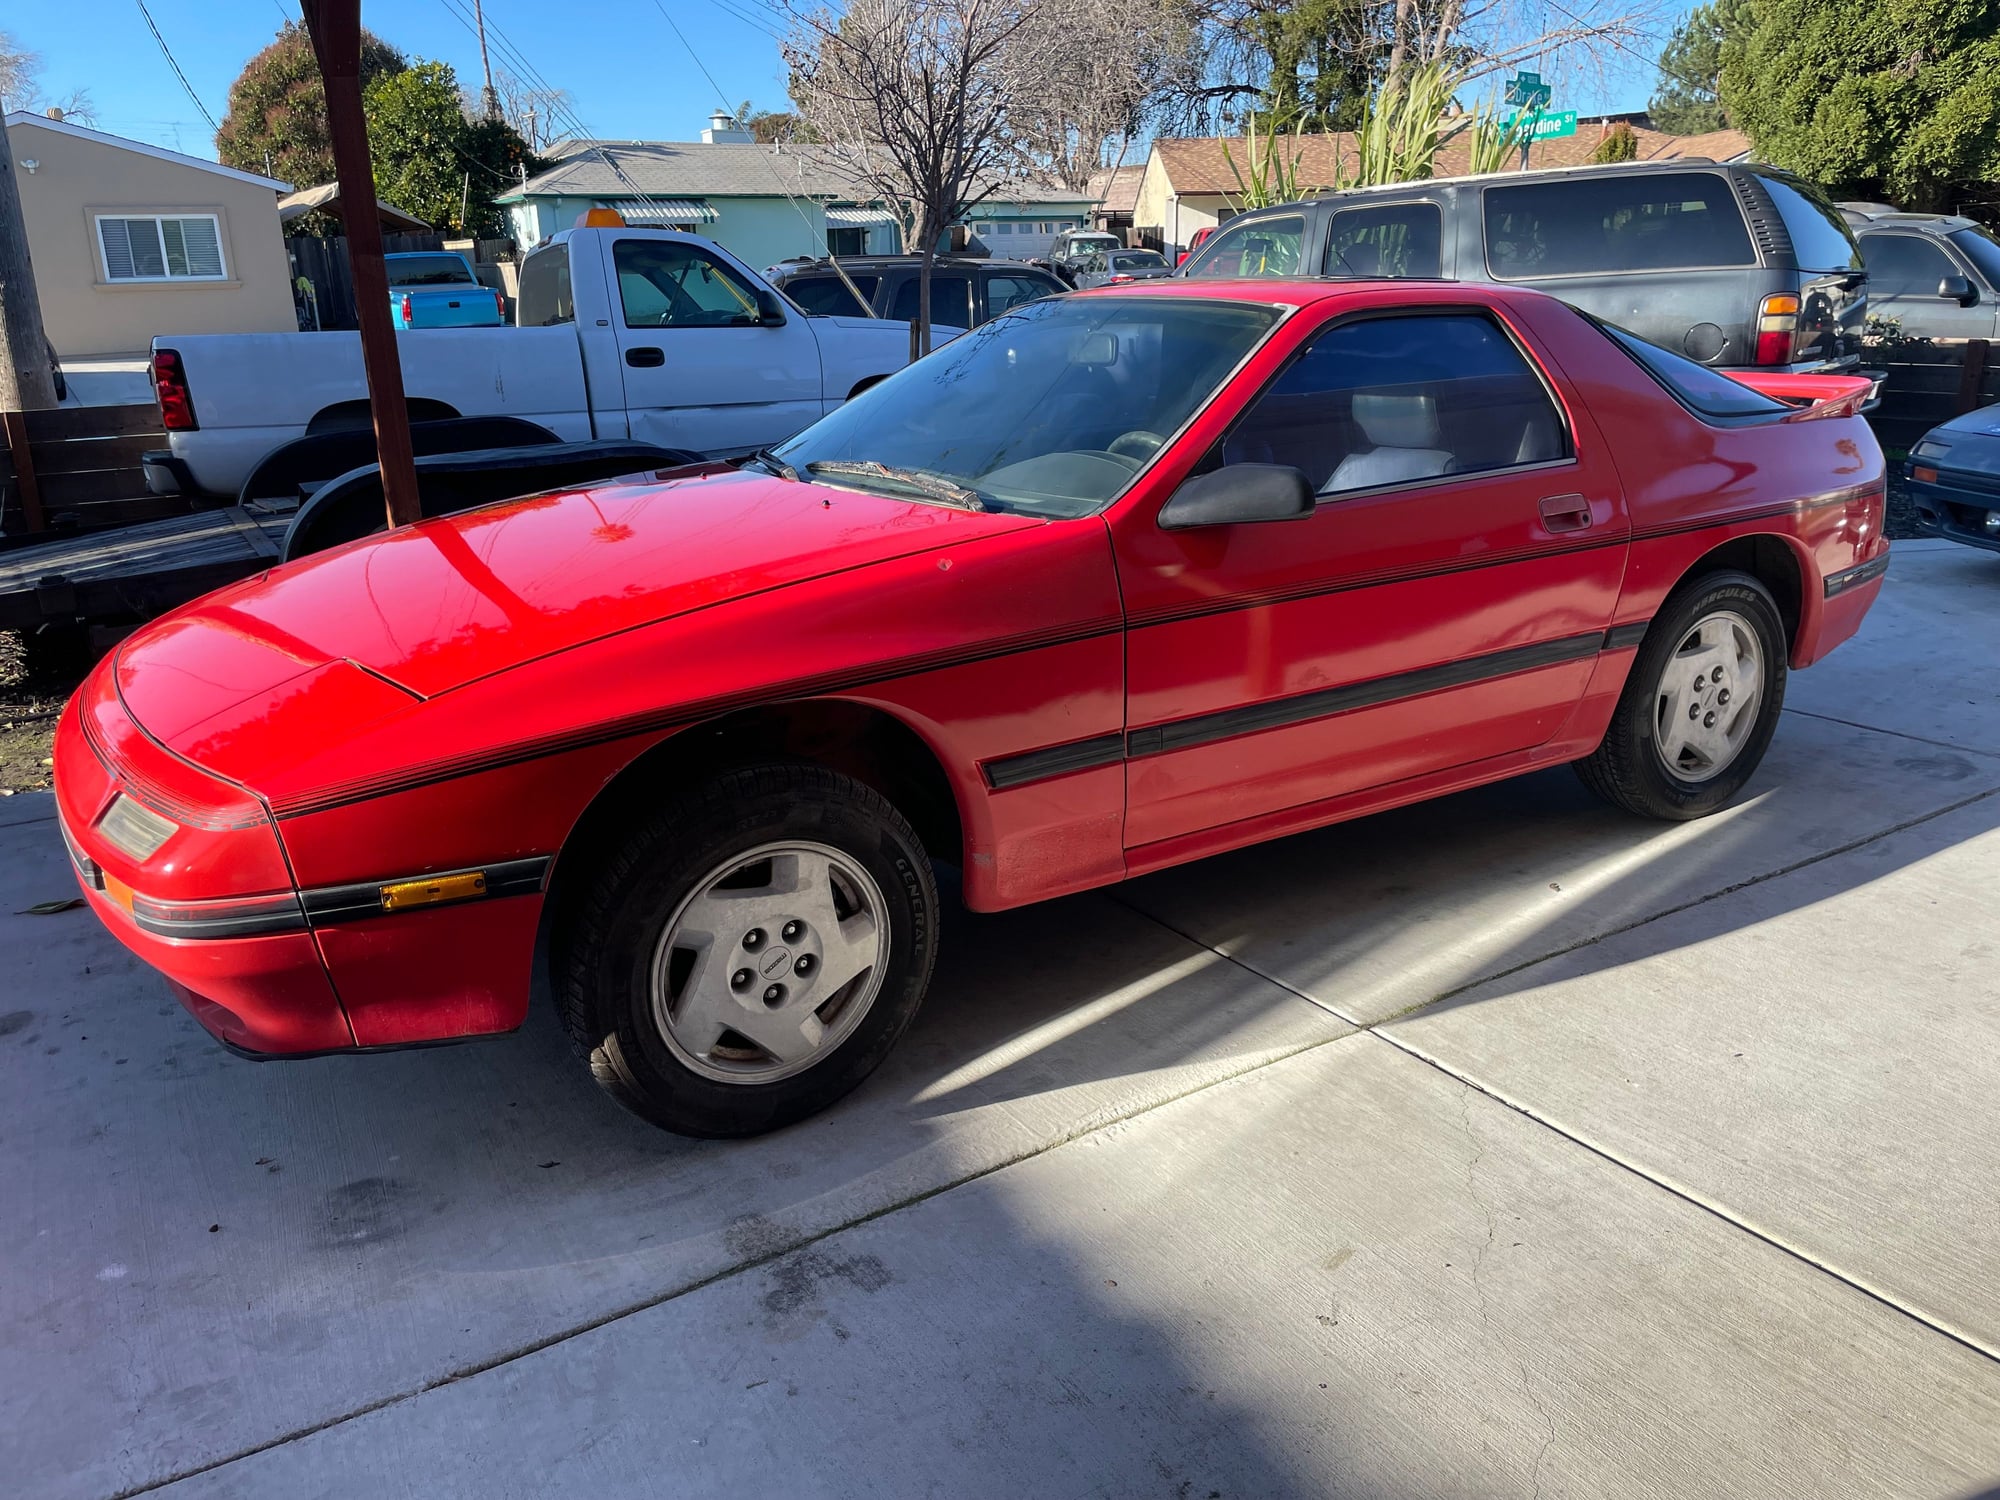 1986 Mazda RX-7 - 1986 Mazda Rx-7 GXL Clean Title - Used - VIN JM1FC3310G0102299 - 143,000 Miles - Other - 2WD - Manual - Coupe - Red - San Leandro, CA 94579, United States